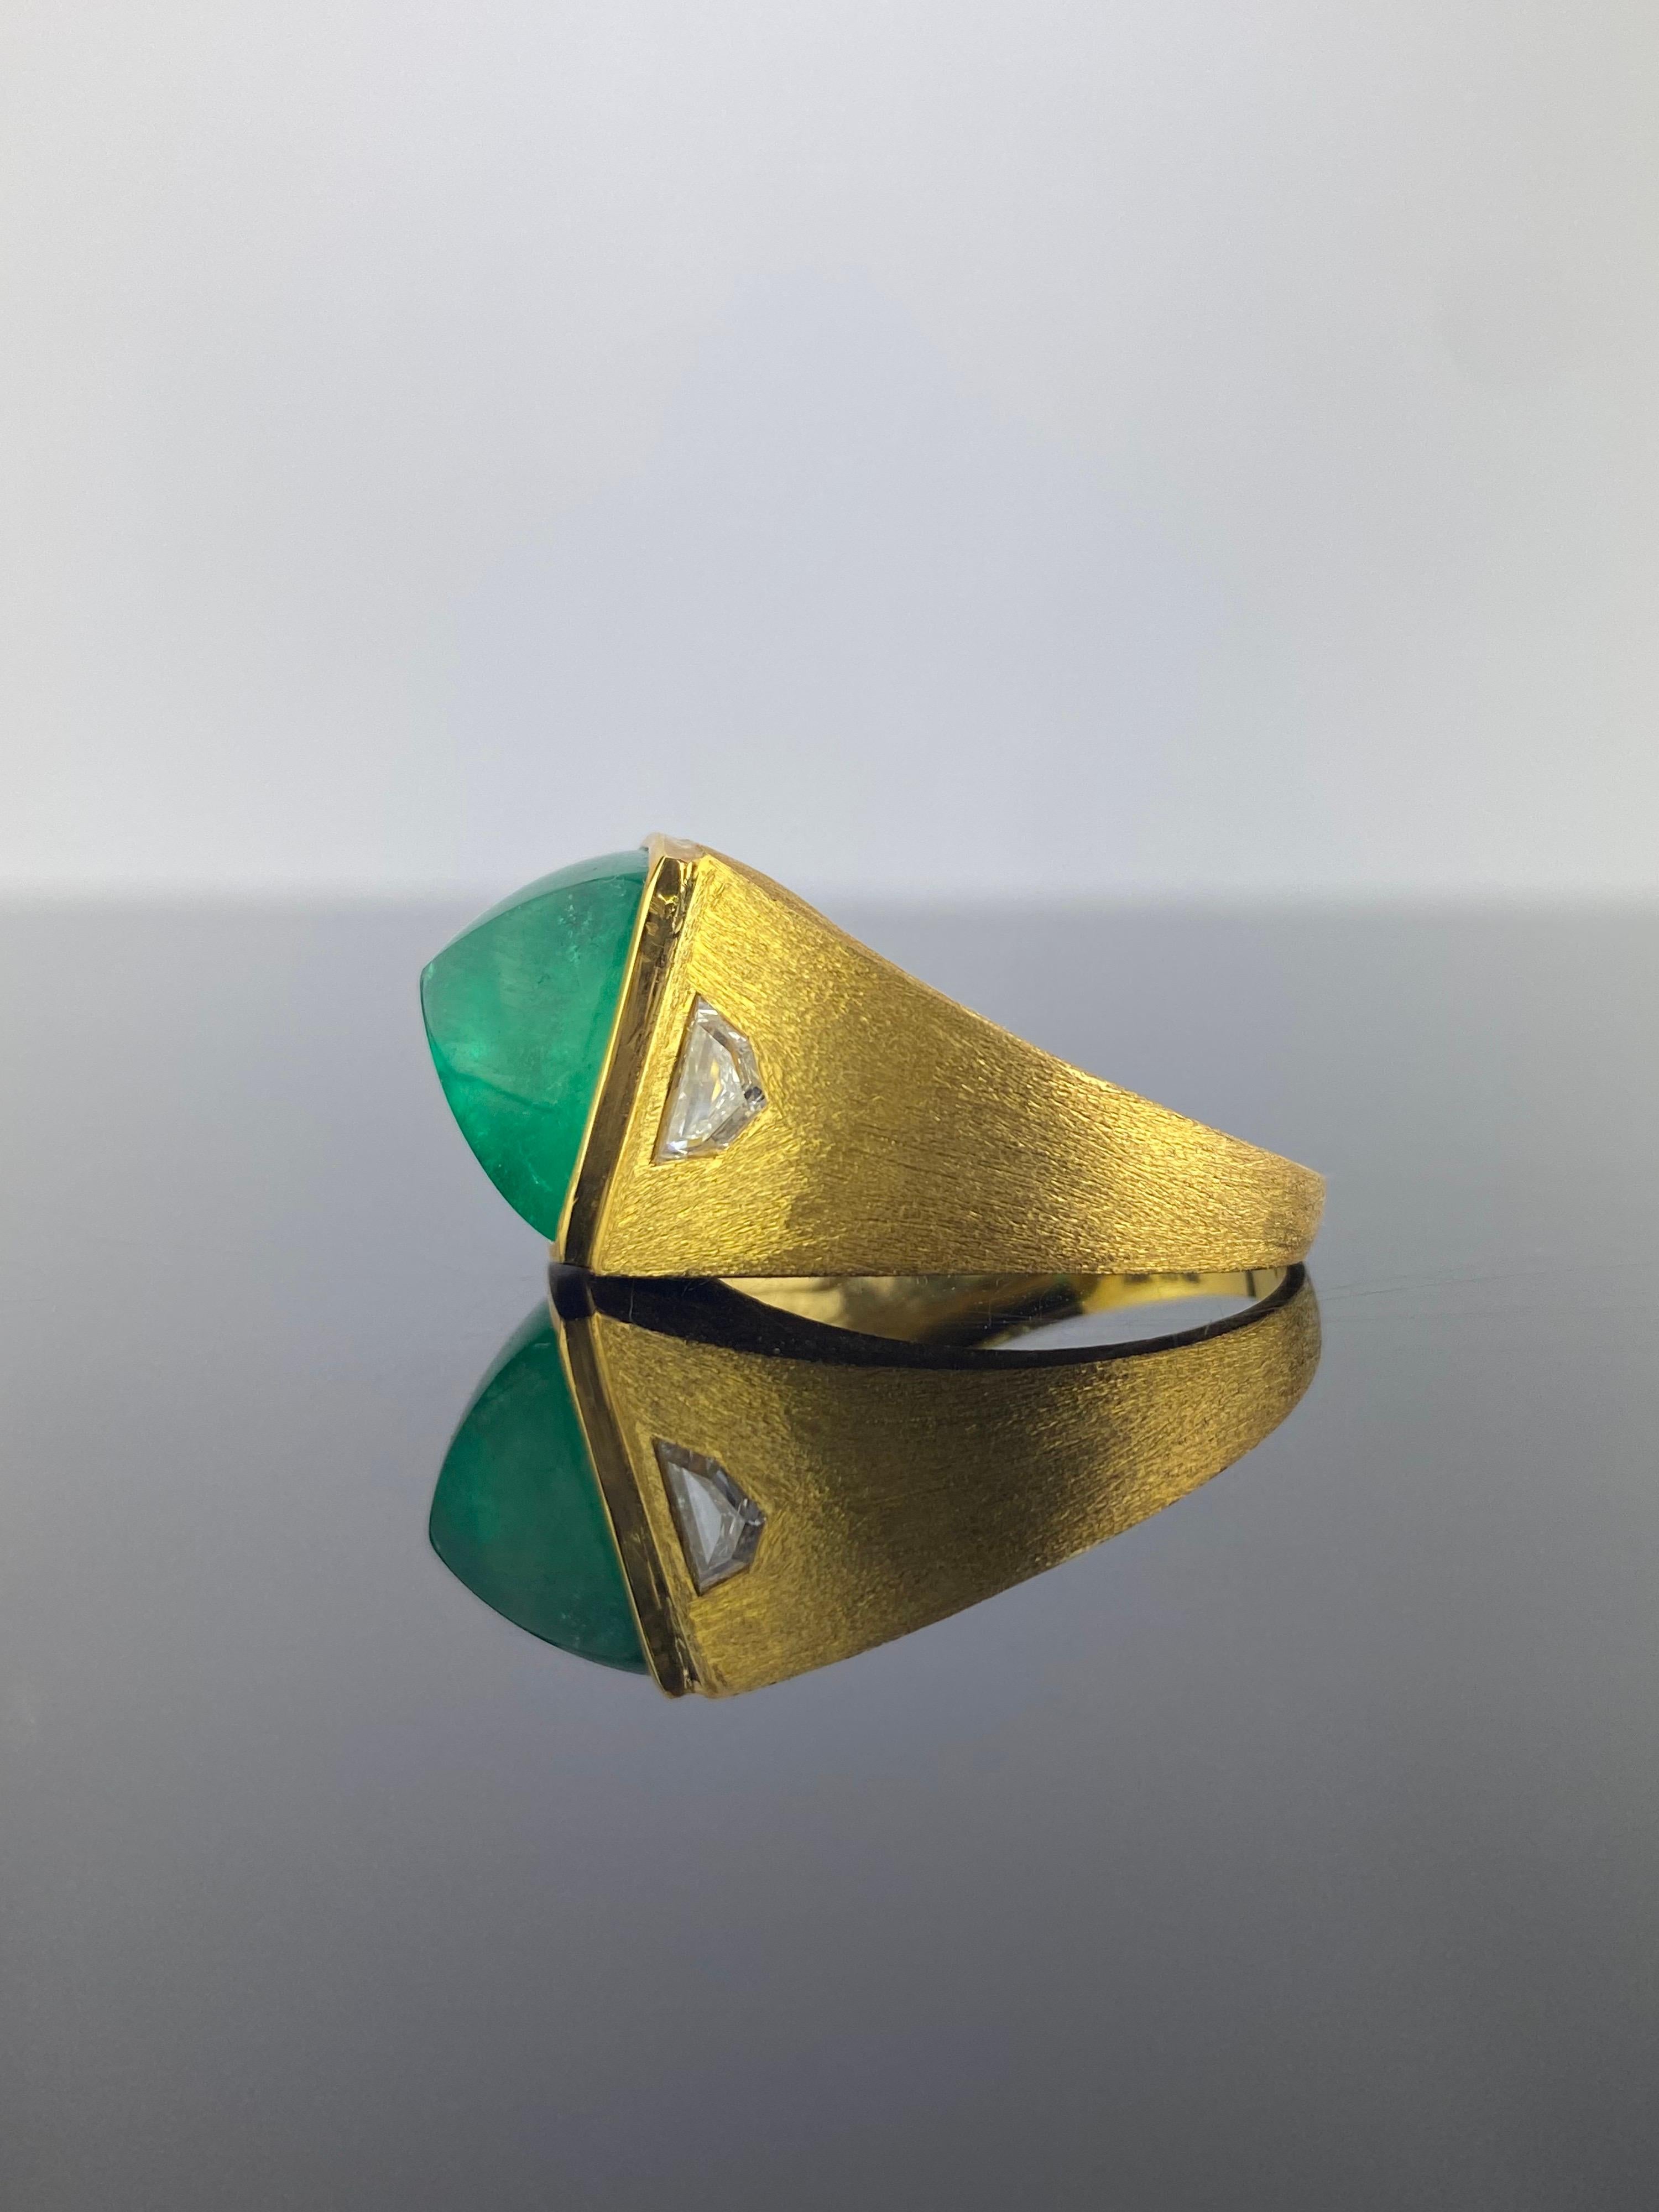 A stunning, antique style, 8.75 carat sugarloaf Colombian Emerald and 0.61 carat Cadillac shaped Diamond signet ring, currently sized at US 7, but can be altered. The stones are set in solid 18K Yellow Gold. 
We provide free shipping. Returns